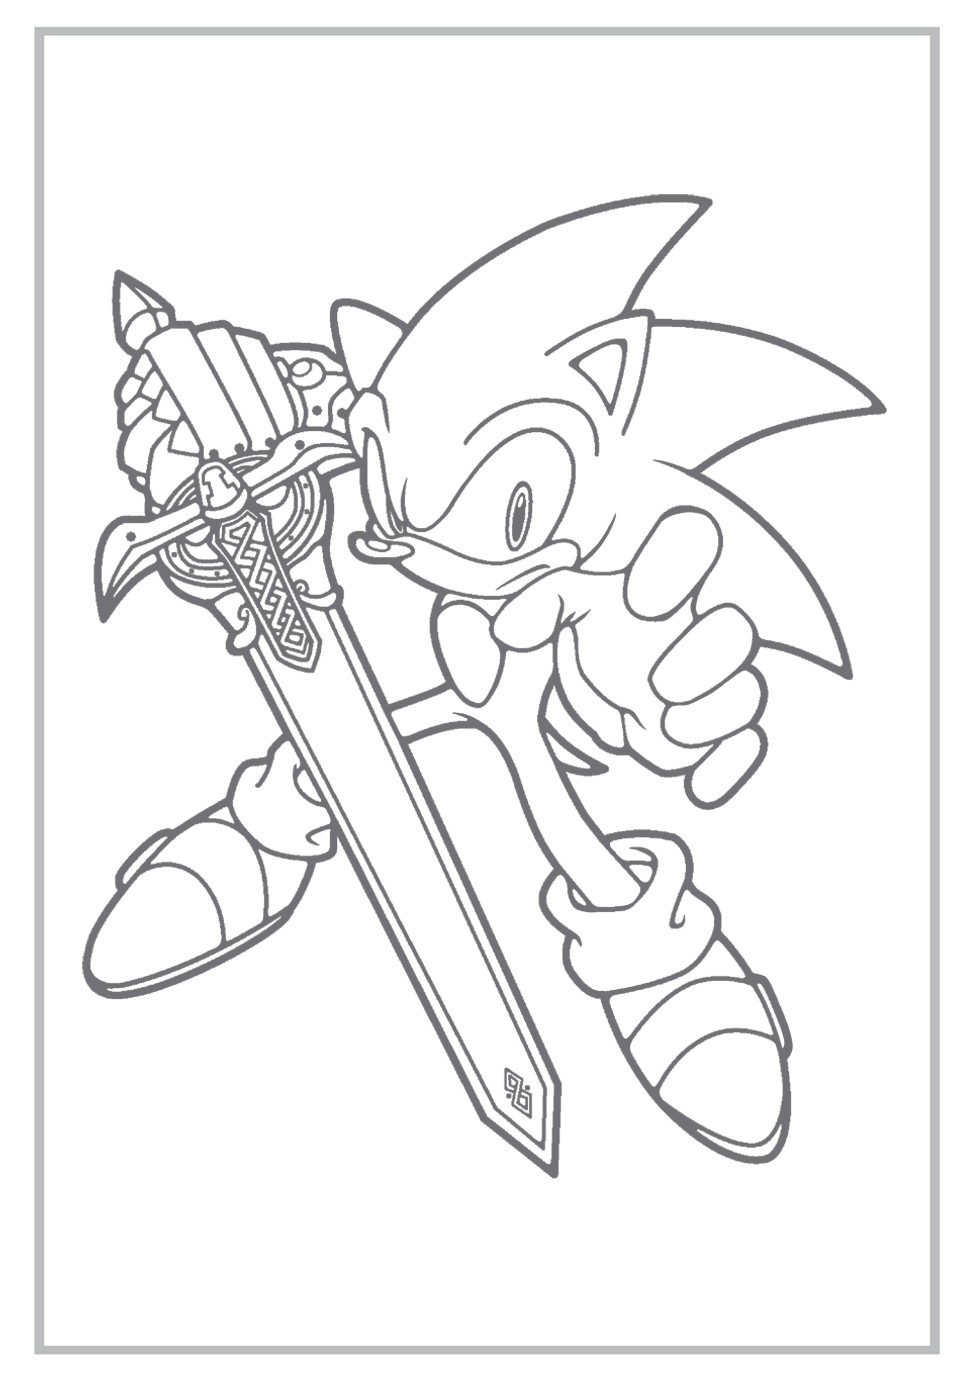 Sonic Coloring Pages | Sonic The Hedgehog Coloring Pages Free - Sonic Coloring Pages Free Printable